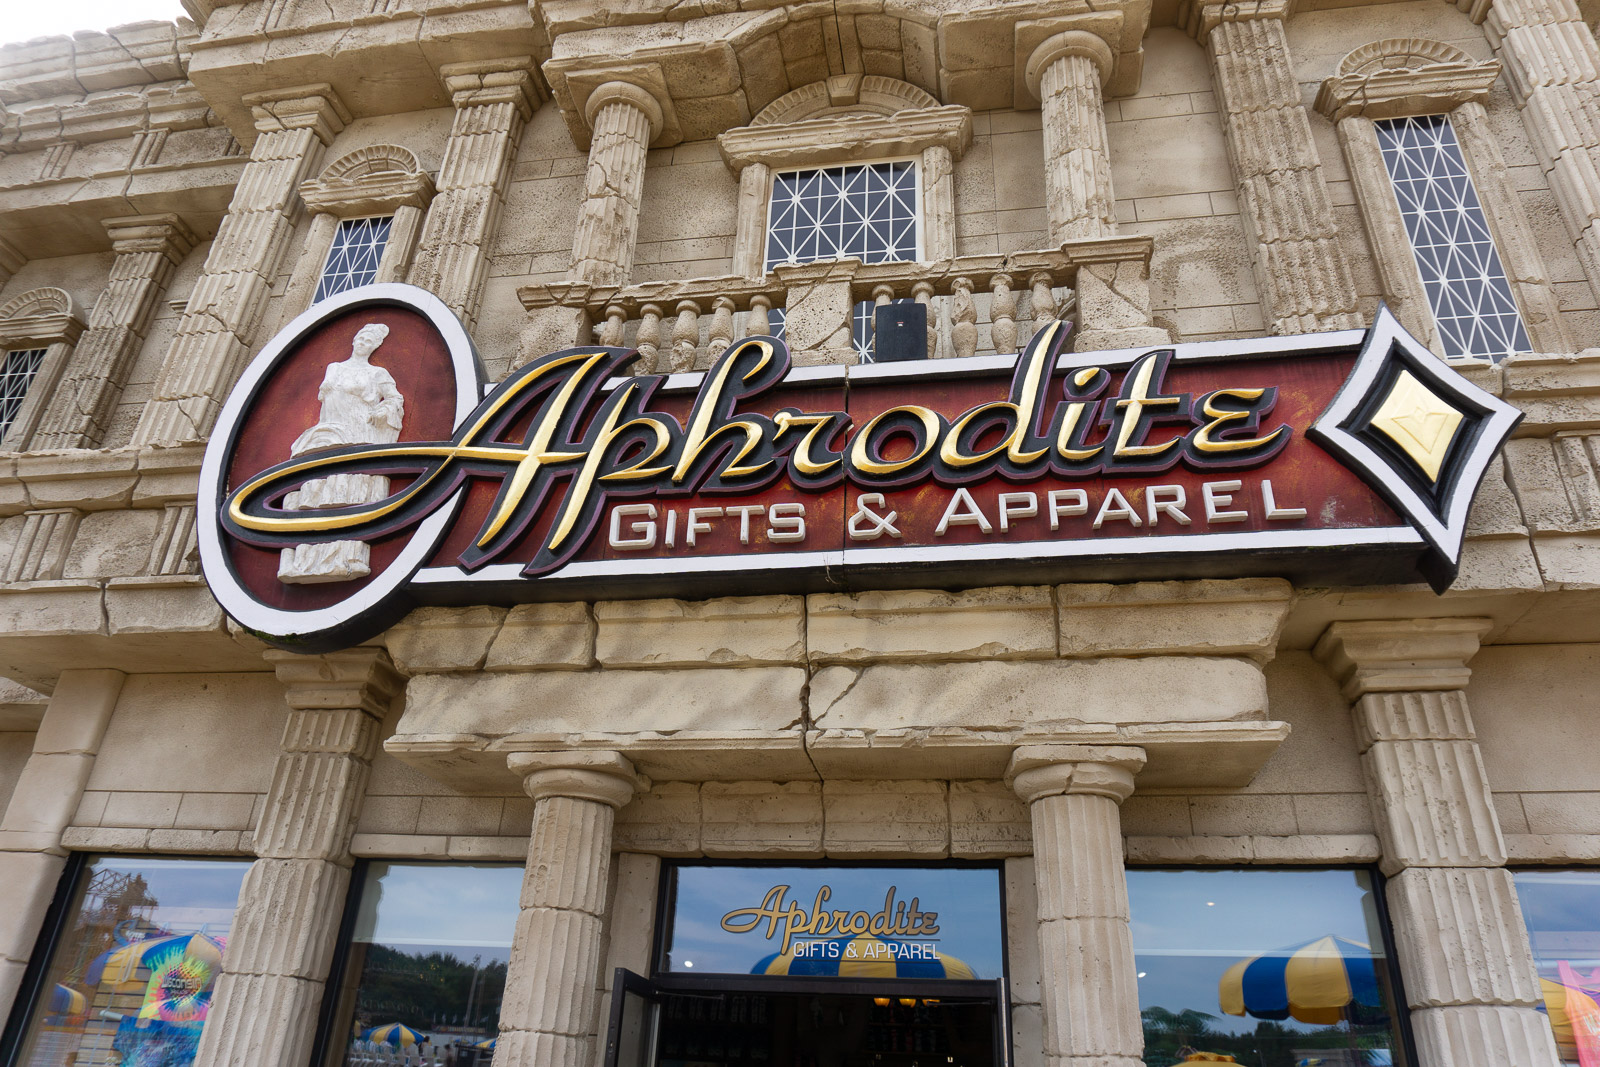 Aphrodite Gifts and Apparel